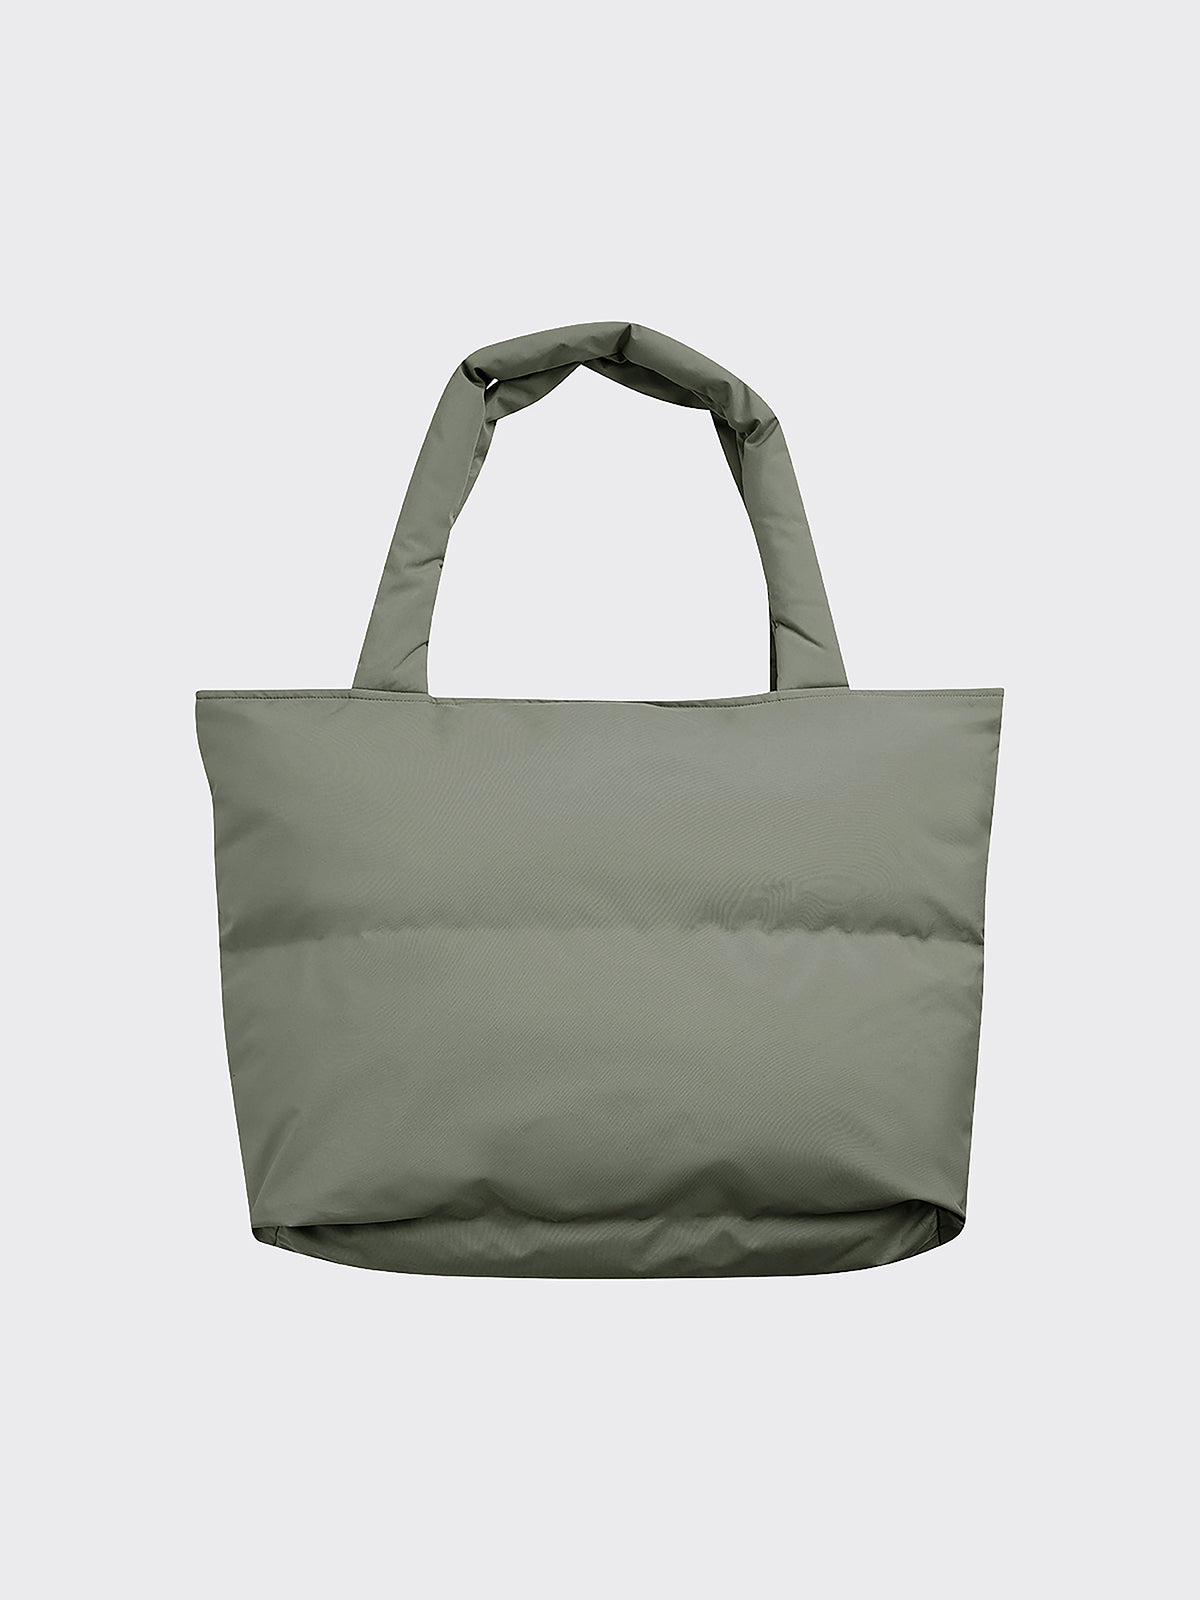 Pillow bag from Blæst in the color Vetiver